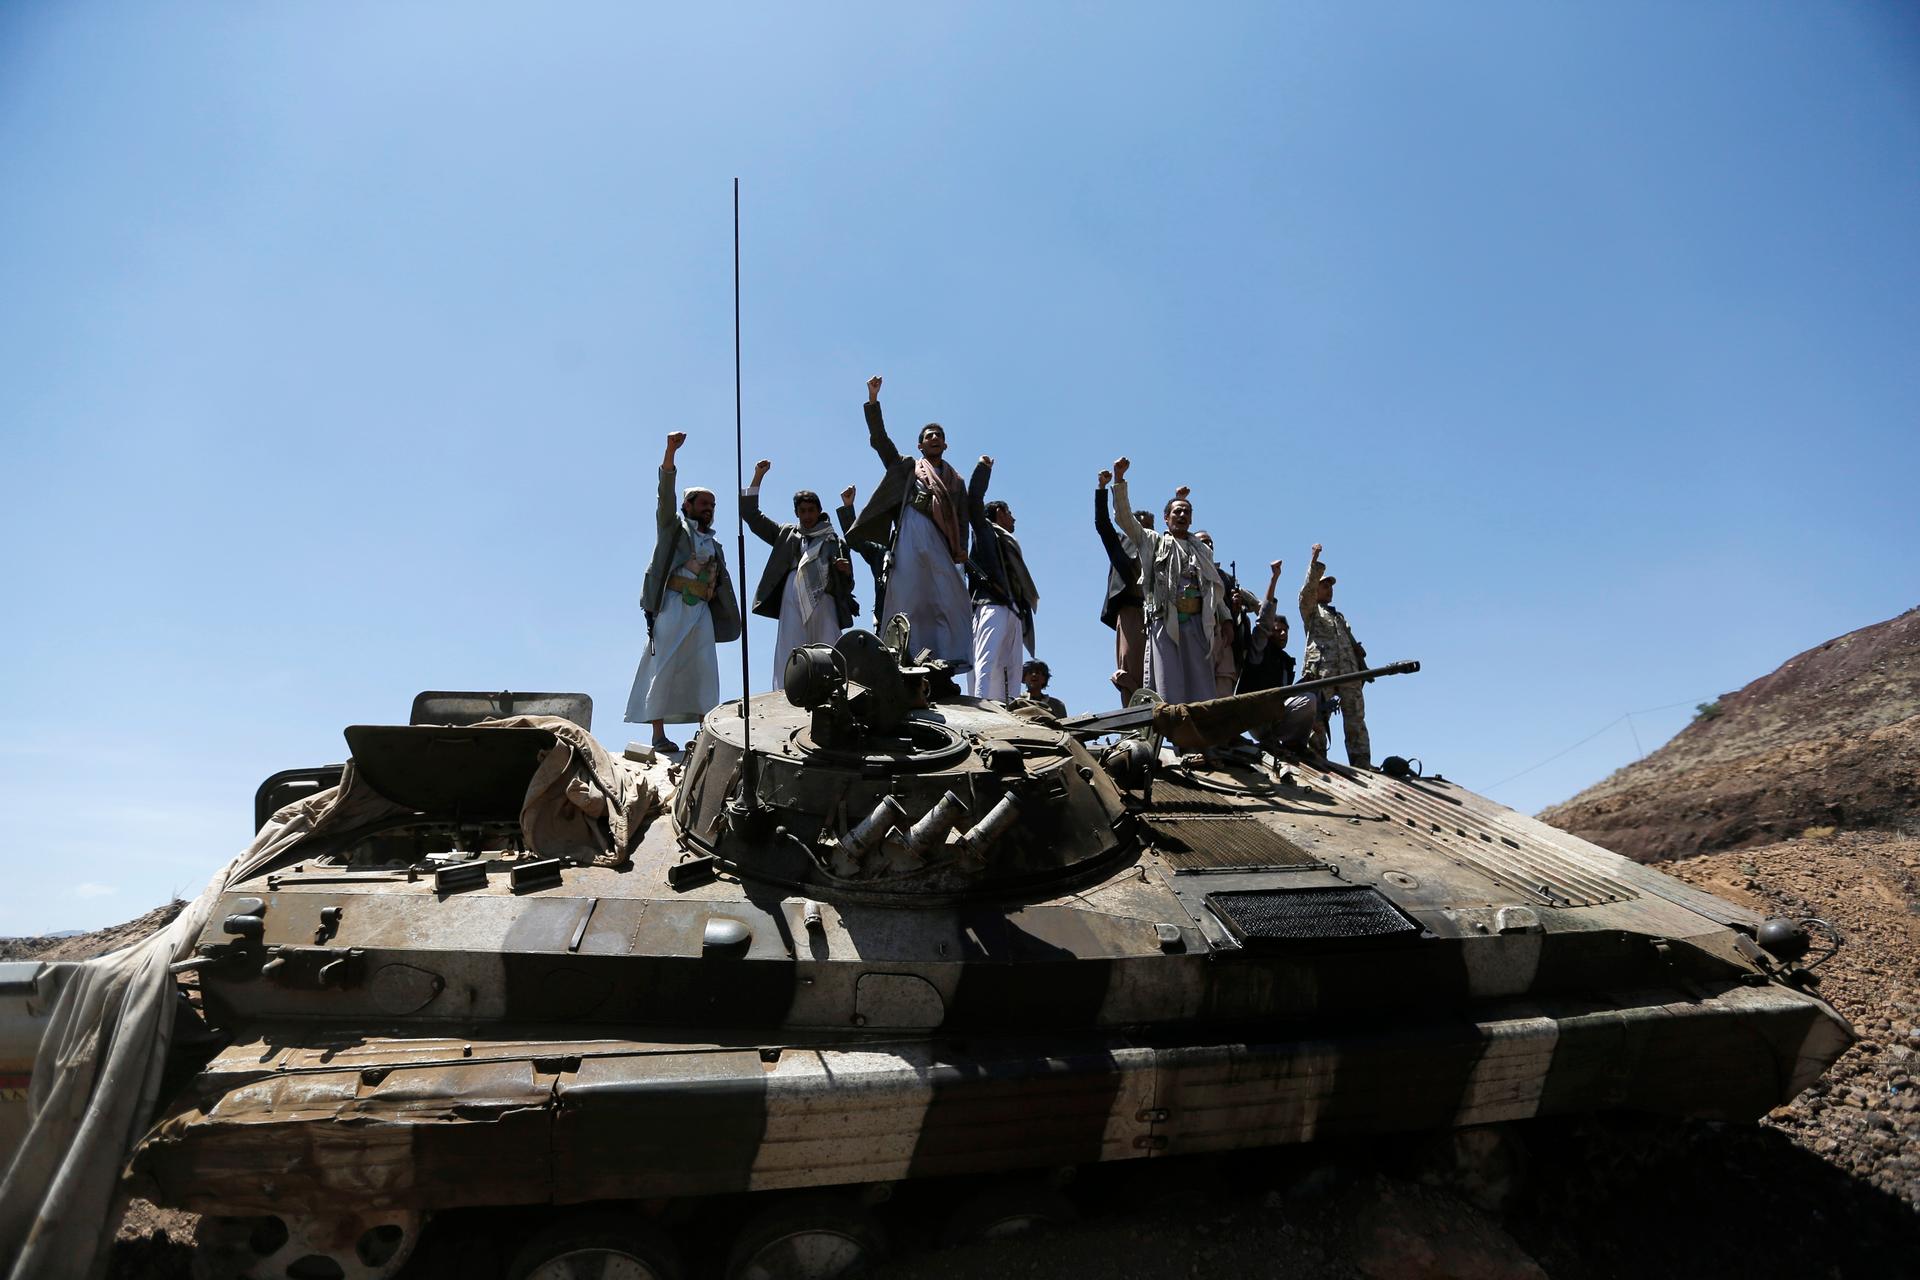 Shiite Houthi rebels gesture as they stand atop an army vehicle they took from the compound of the army's First Armoured Division in Sanaa on September 22, 2014.